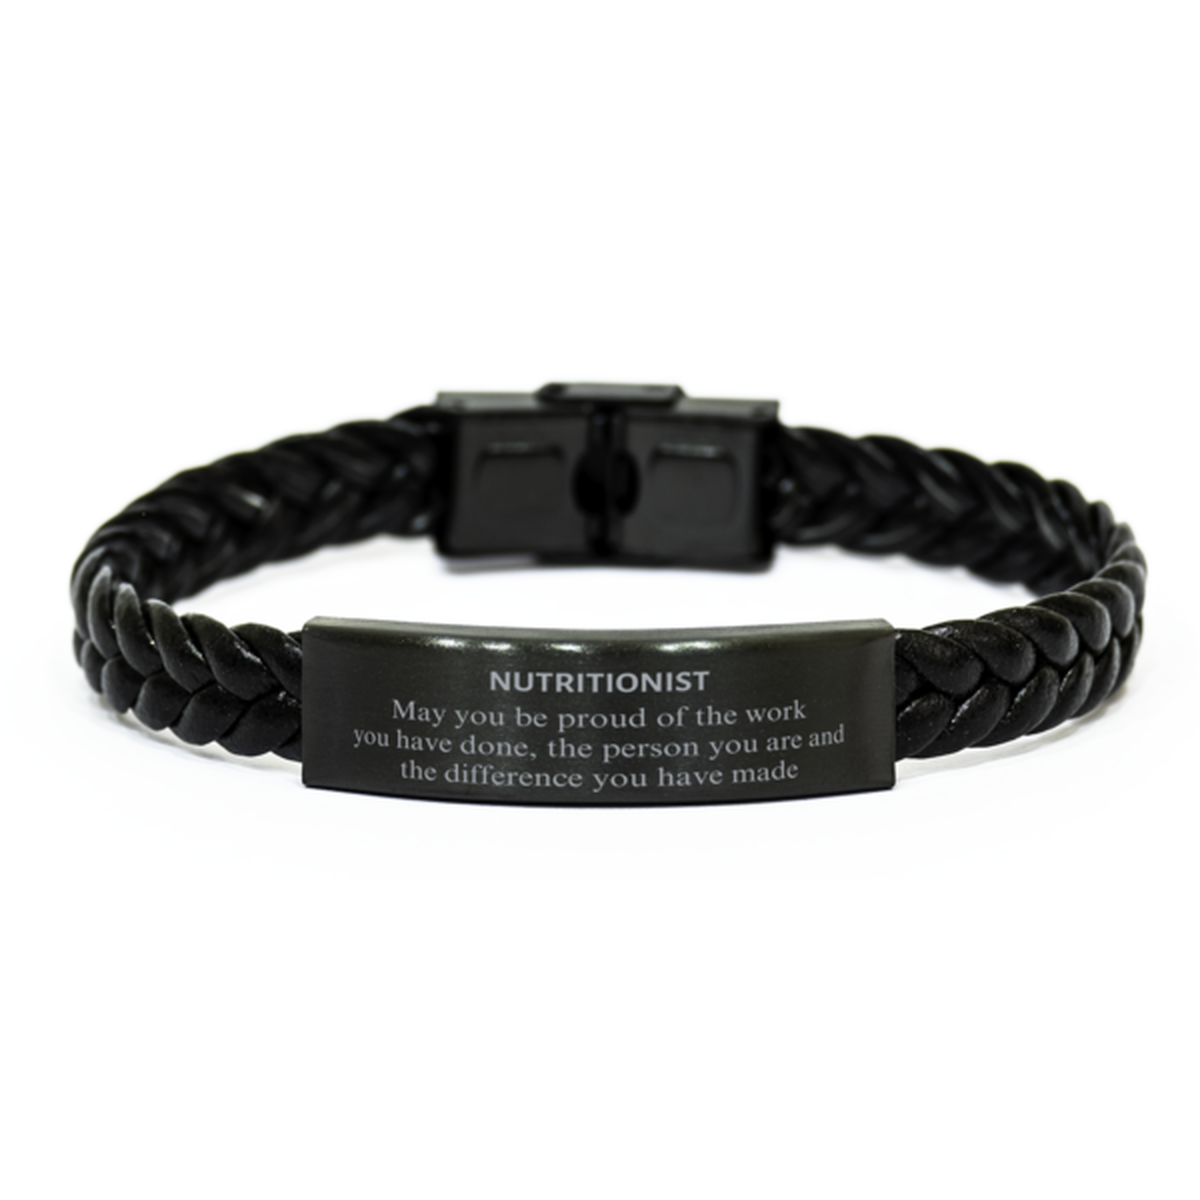 Nutritionist May you be proud of the work you have done, Retirement Nutritionist Braided Leather Bracelet for Colleague Appreciation Gifts Amazing for Nutritionist